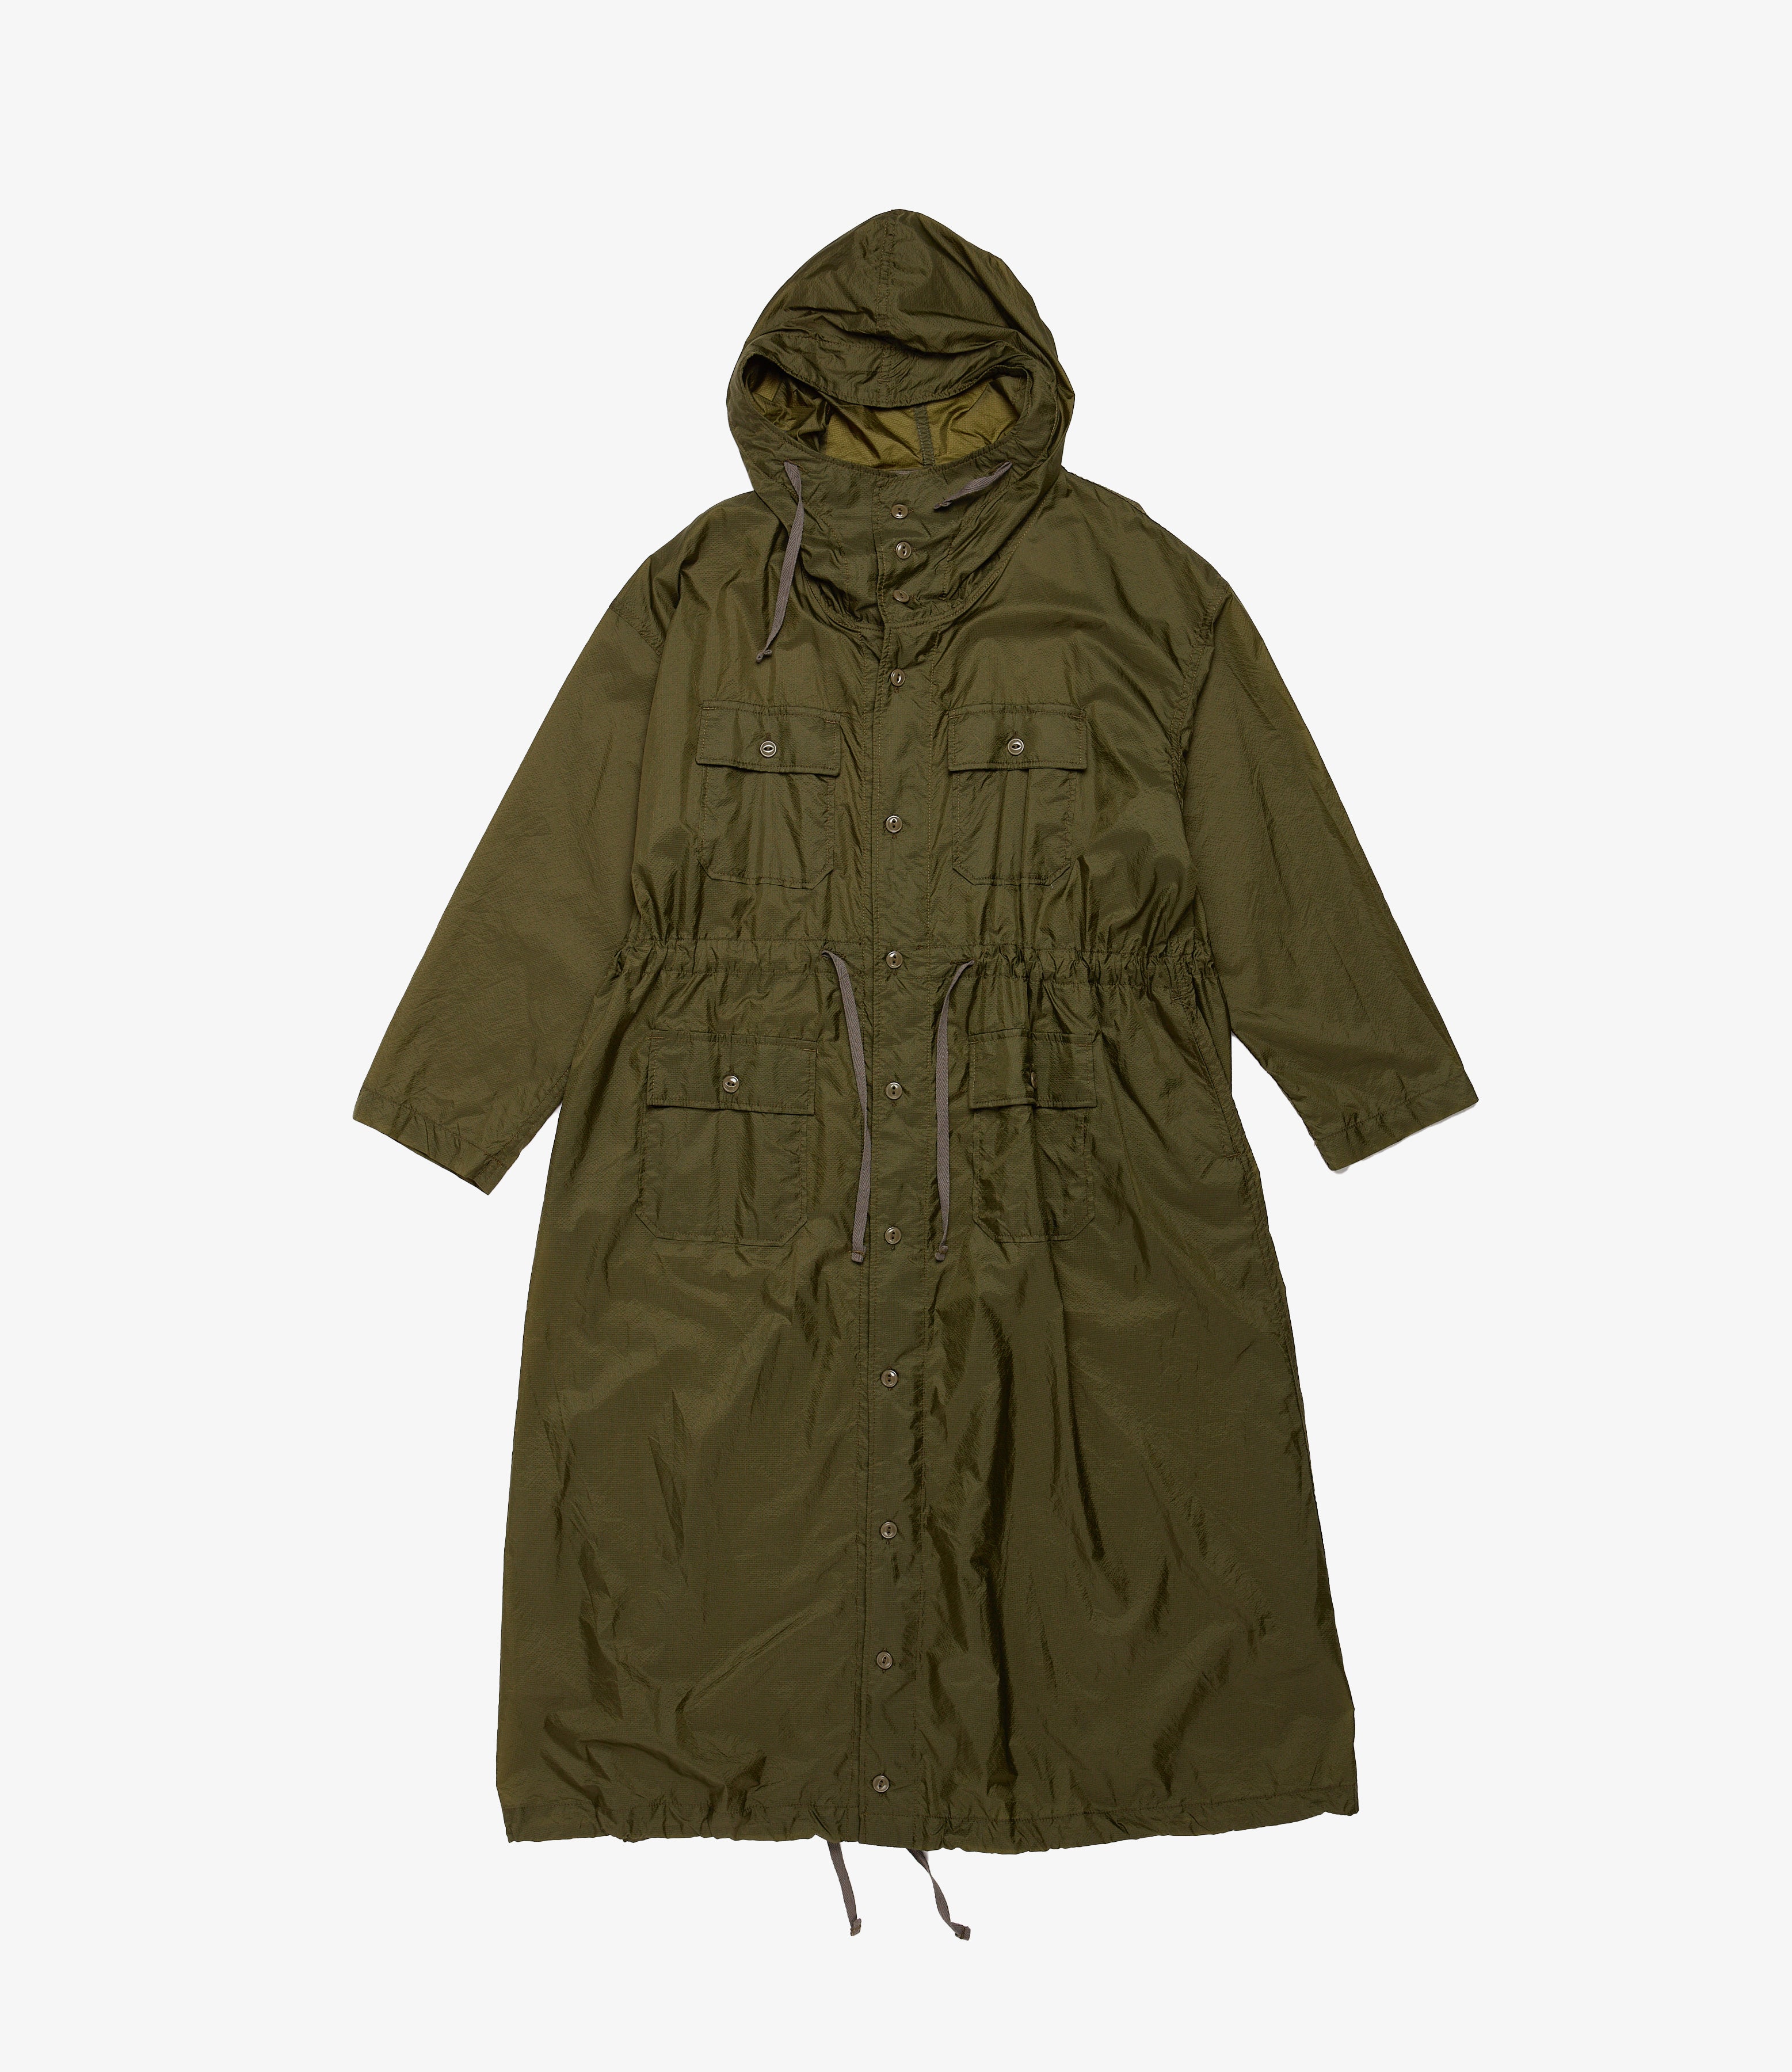 Engineered Garments Cagoule Dress - Olive Nylon Micro Ripstop